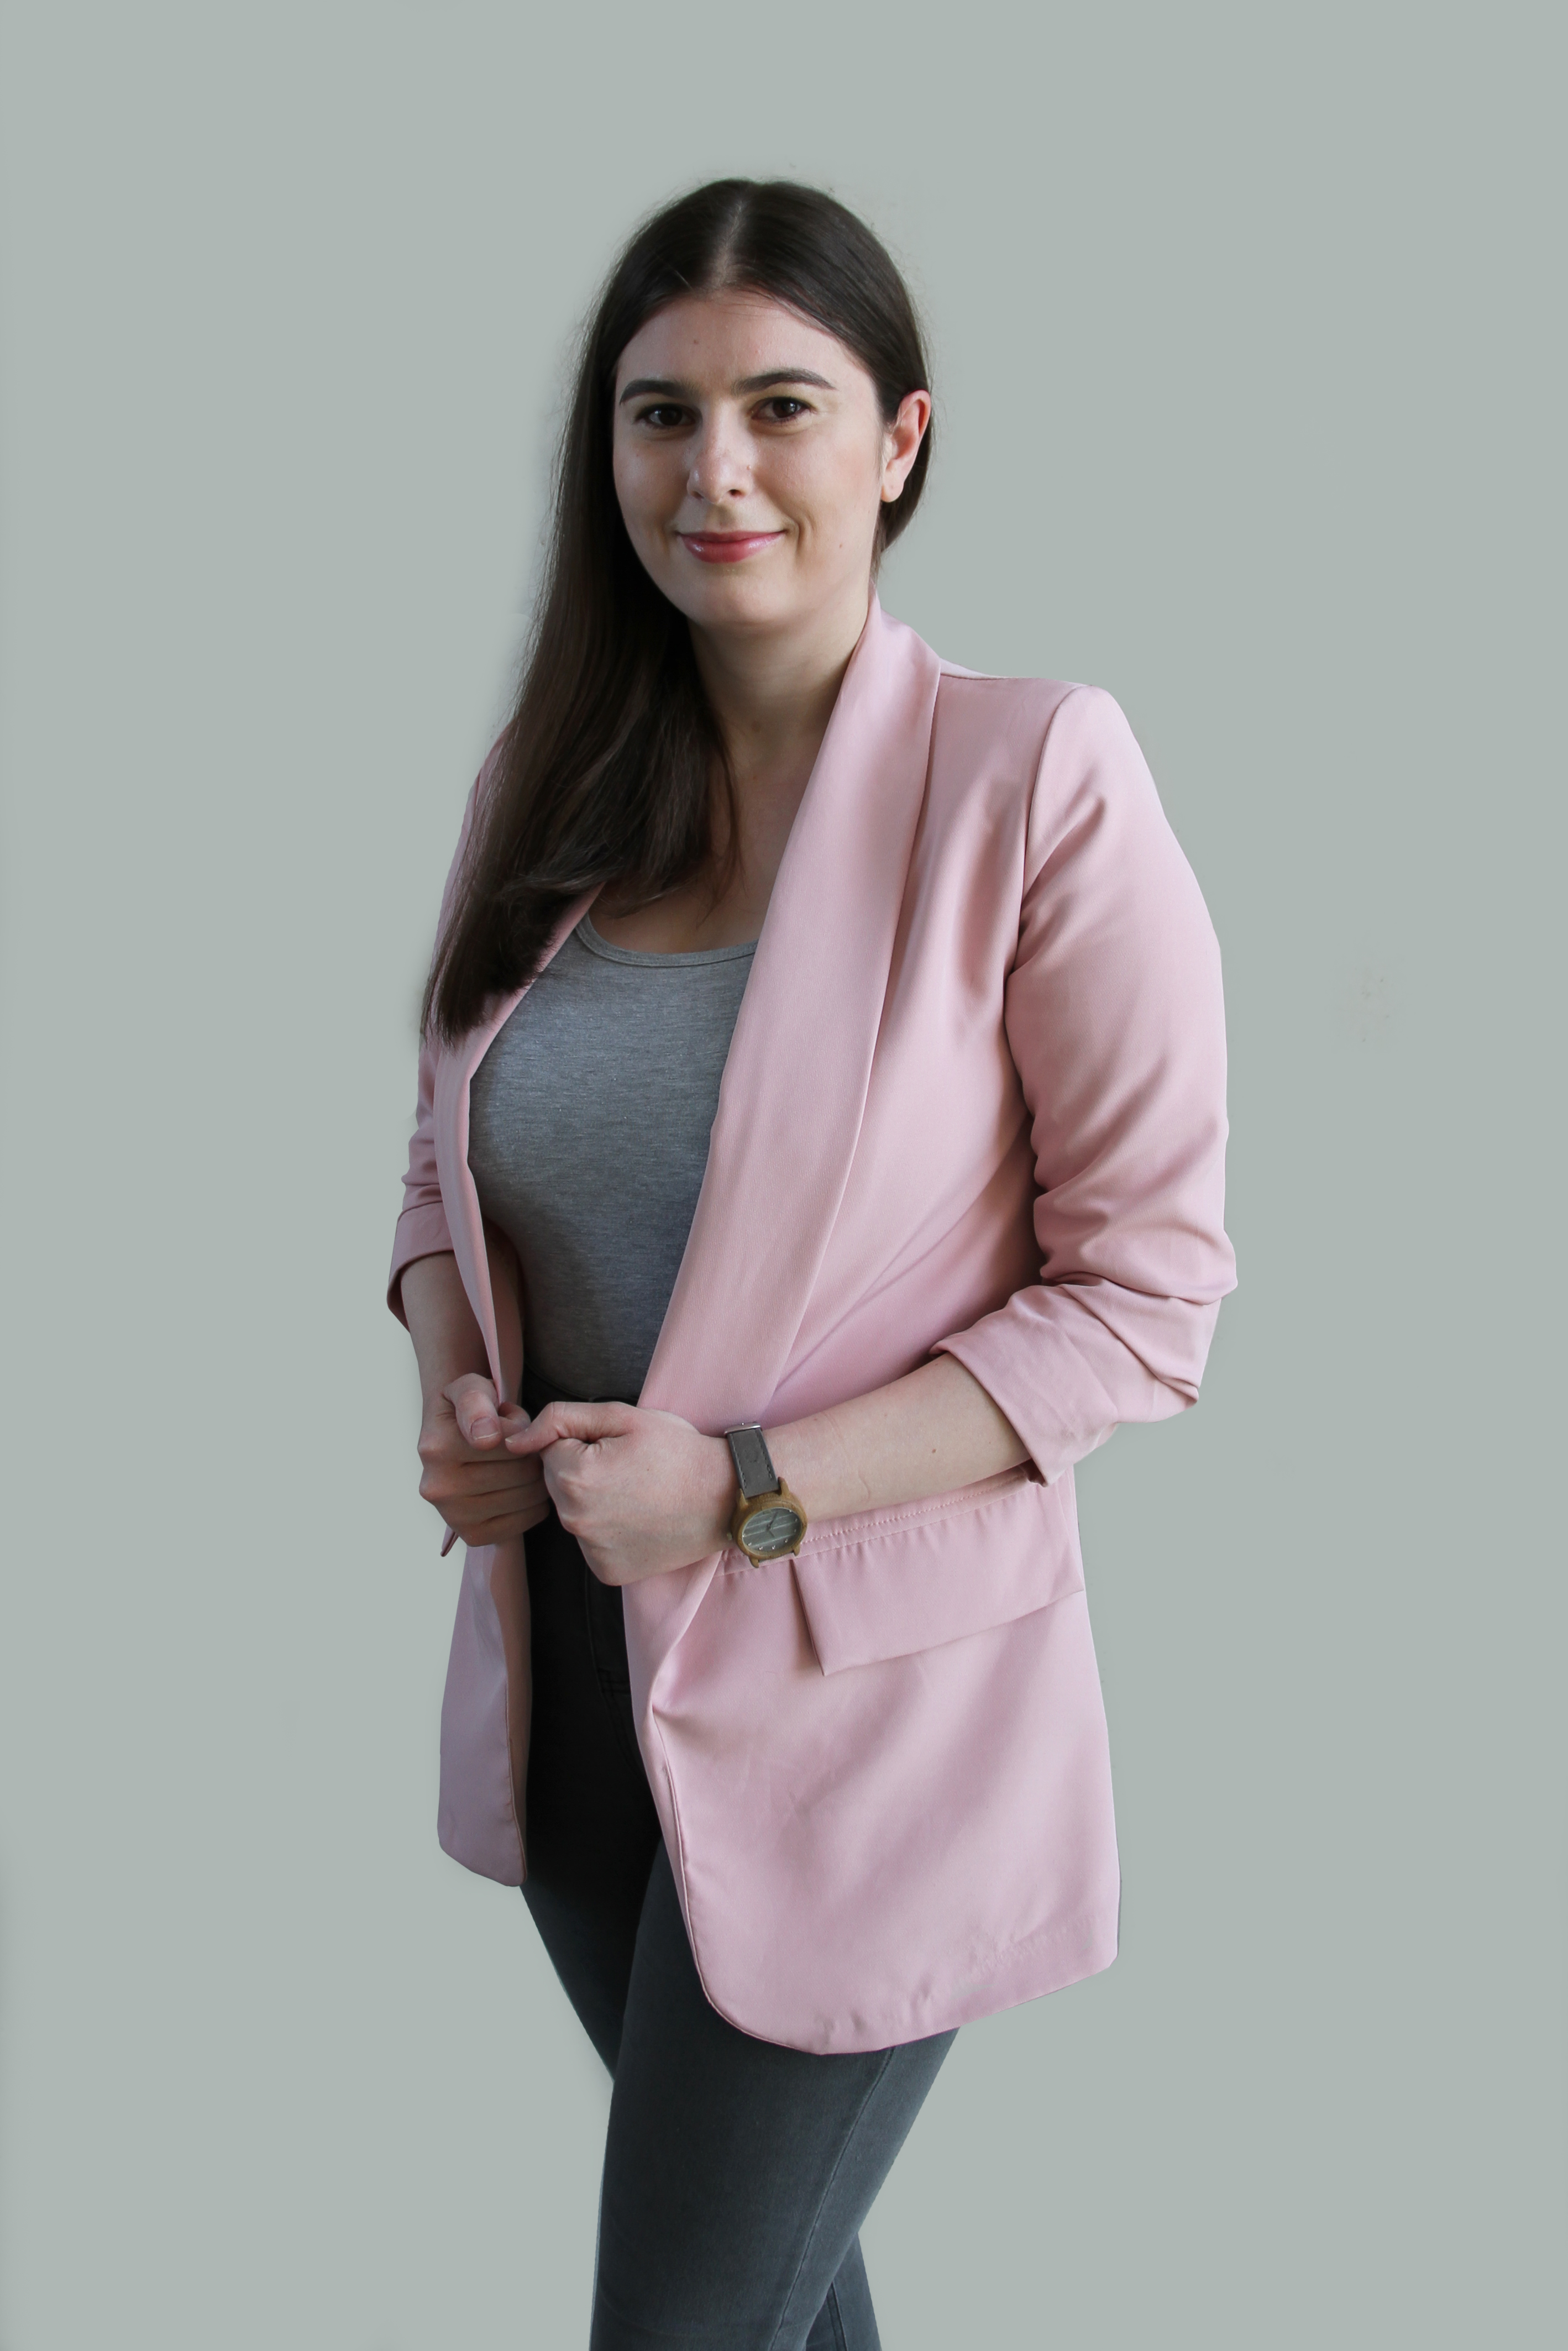 Dr Justyna Wilak